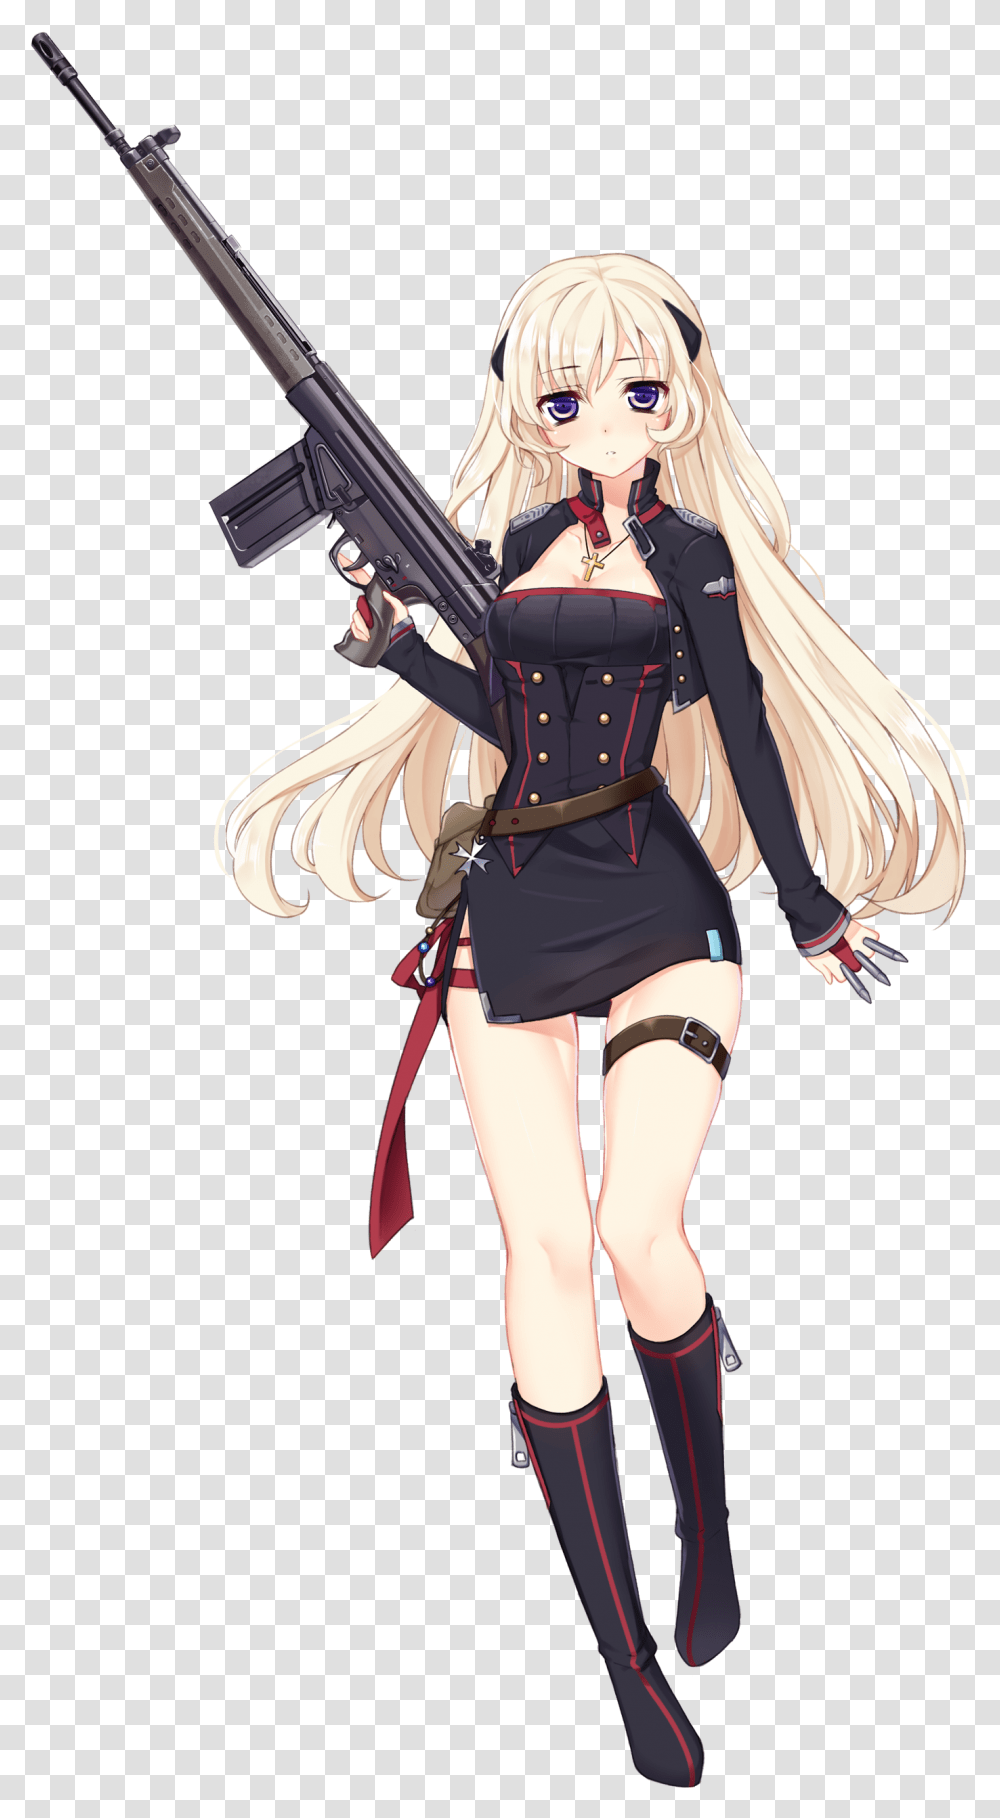 Anime Girl With Gun Cosplay Costume For Girls, Manga, Comics, Book, Person Transparent Png